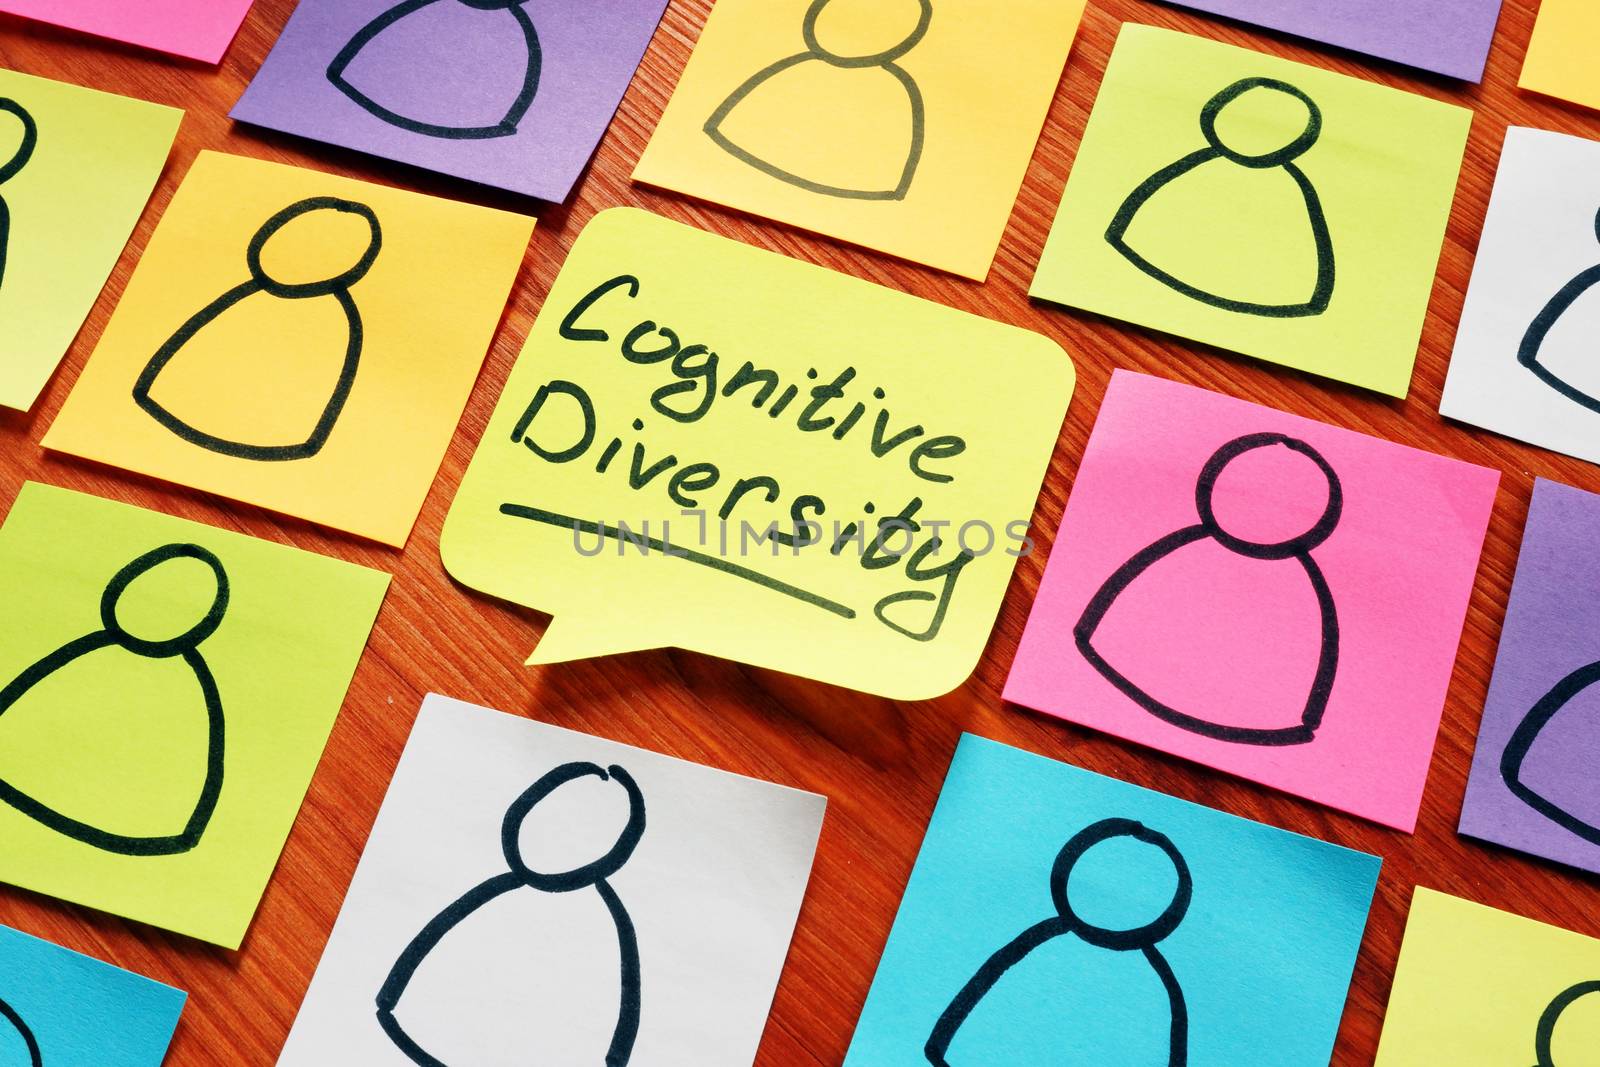 Cognitive Diversity and drawn figures on the pages. by designer491